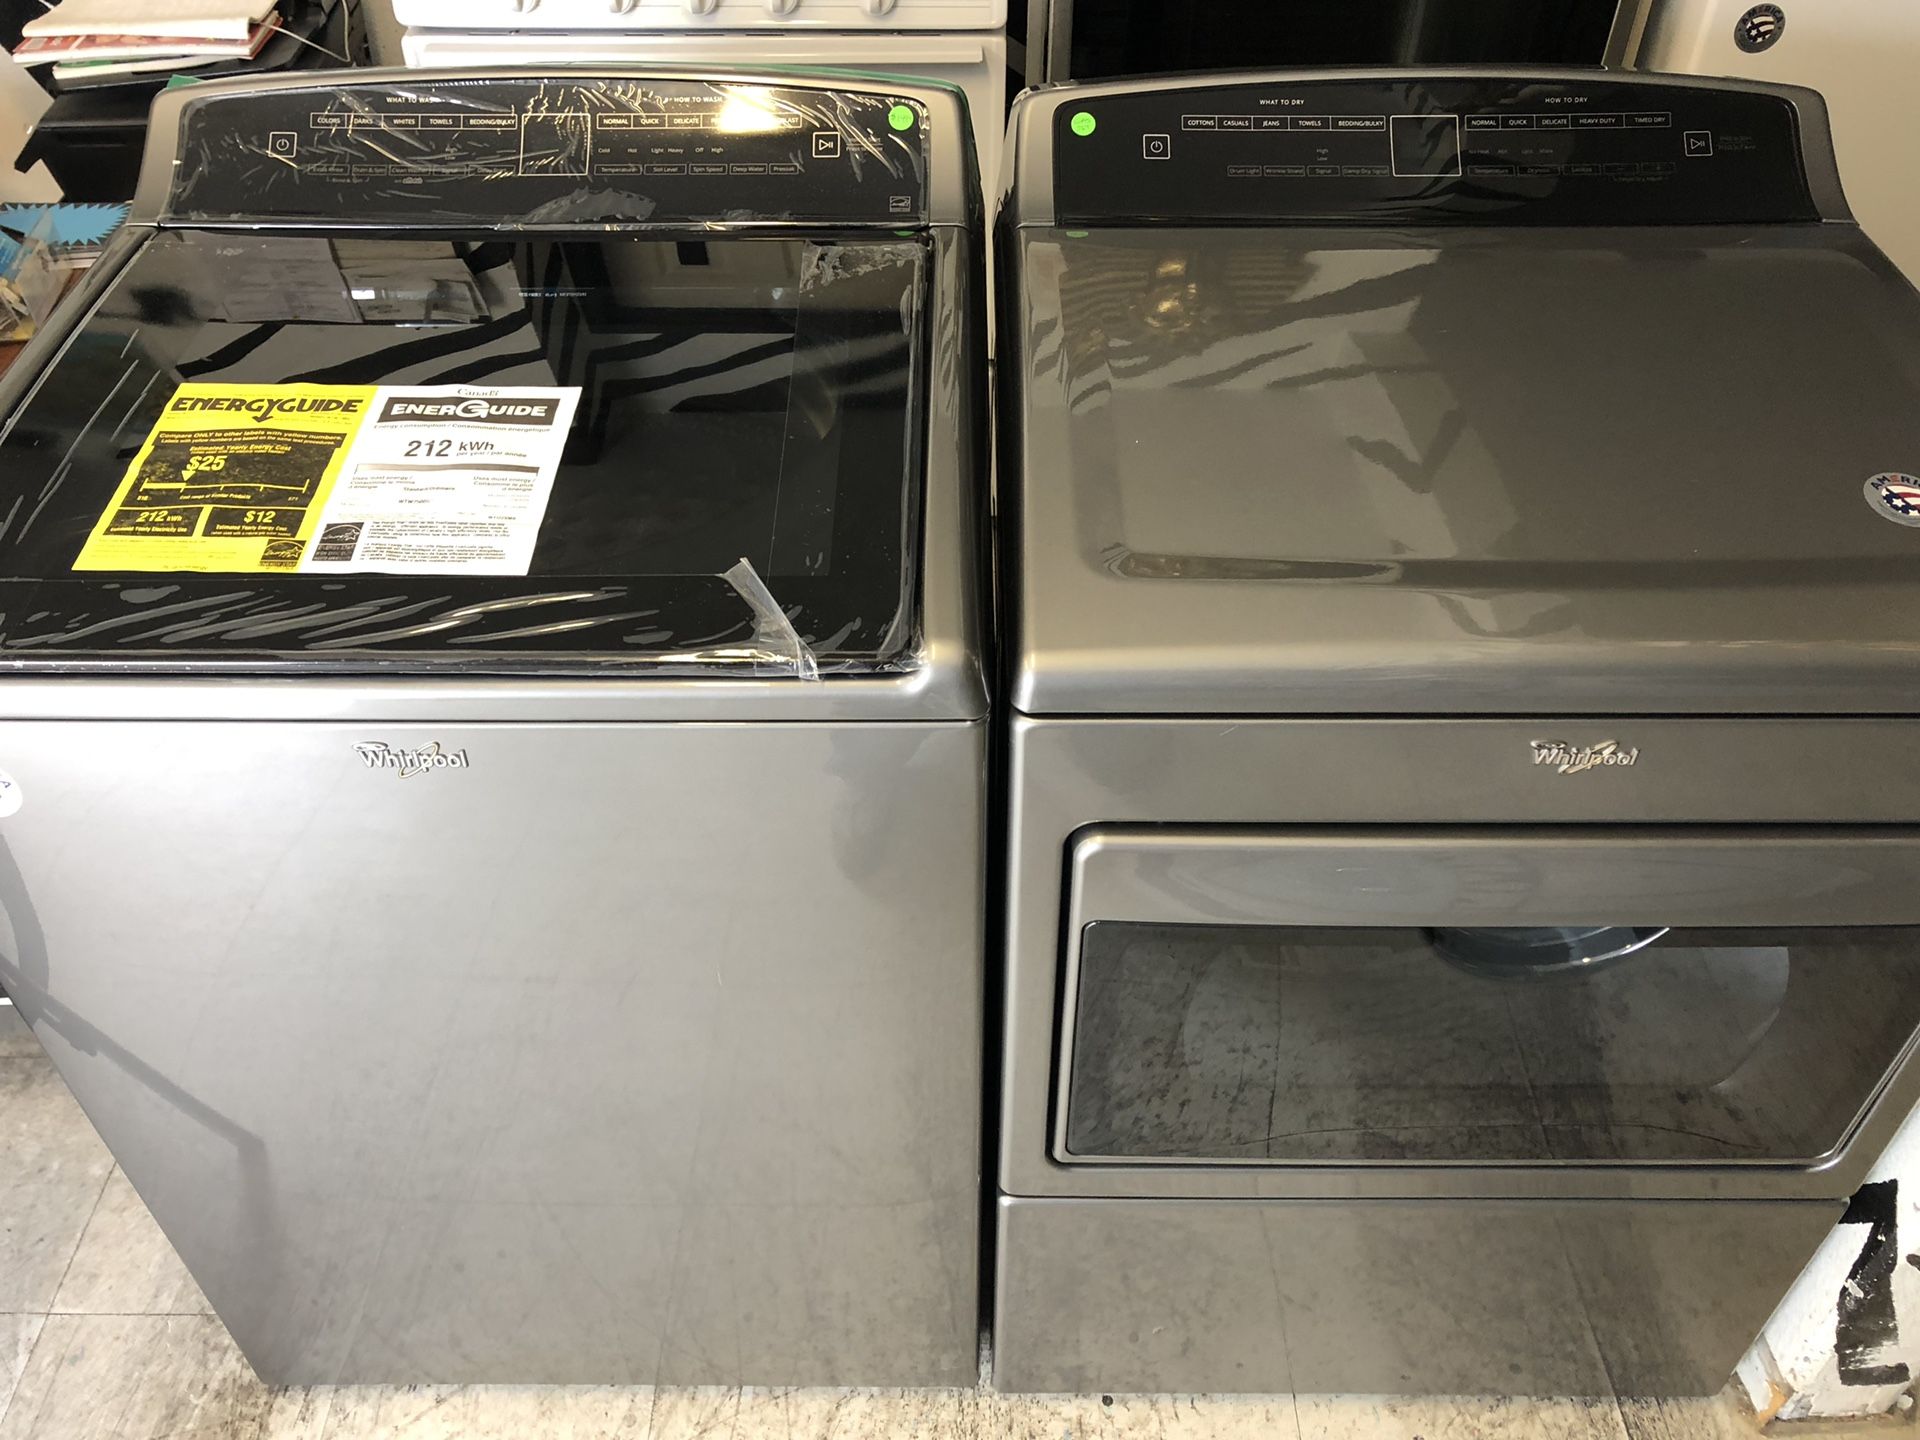 New whirlpool top load washer and gas dryer set